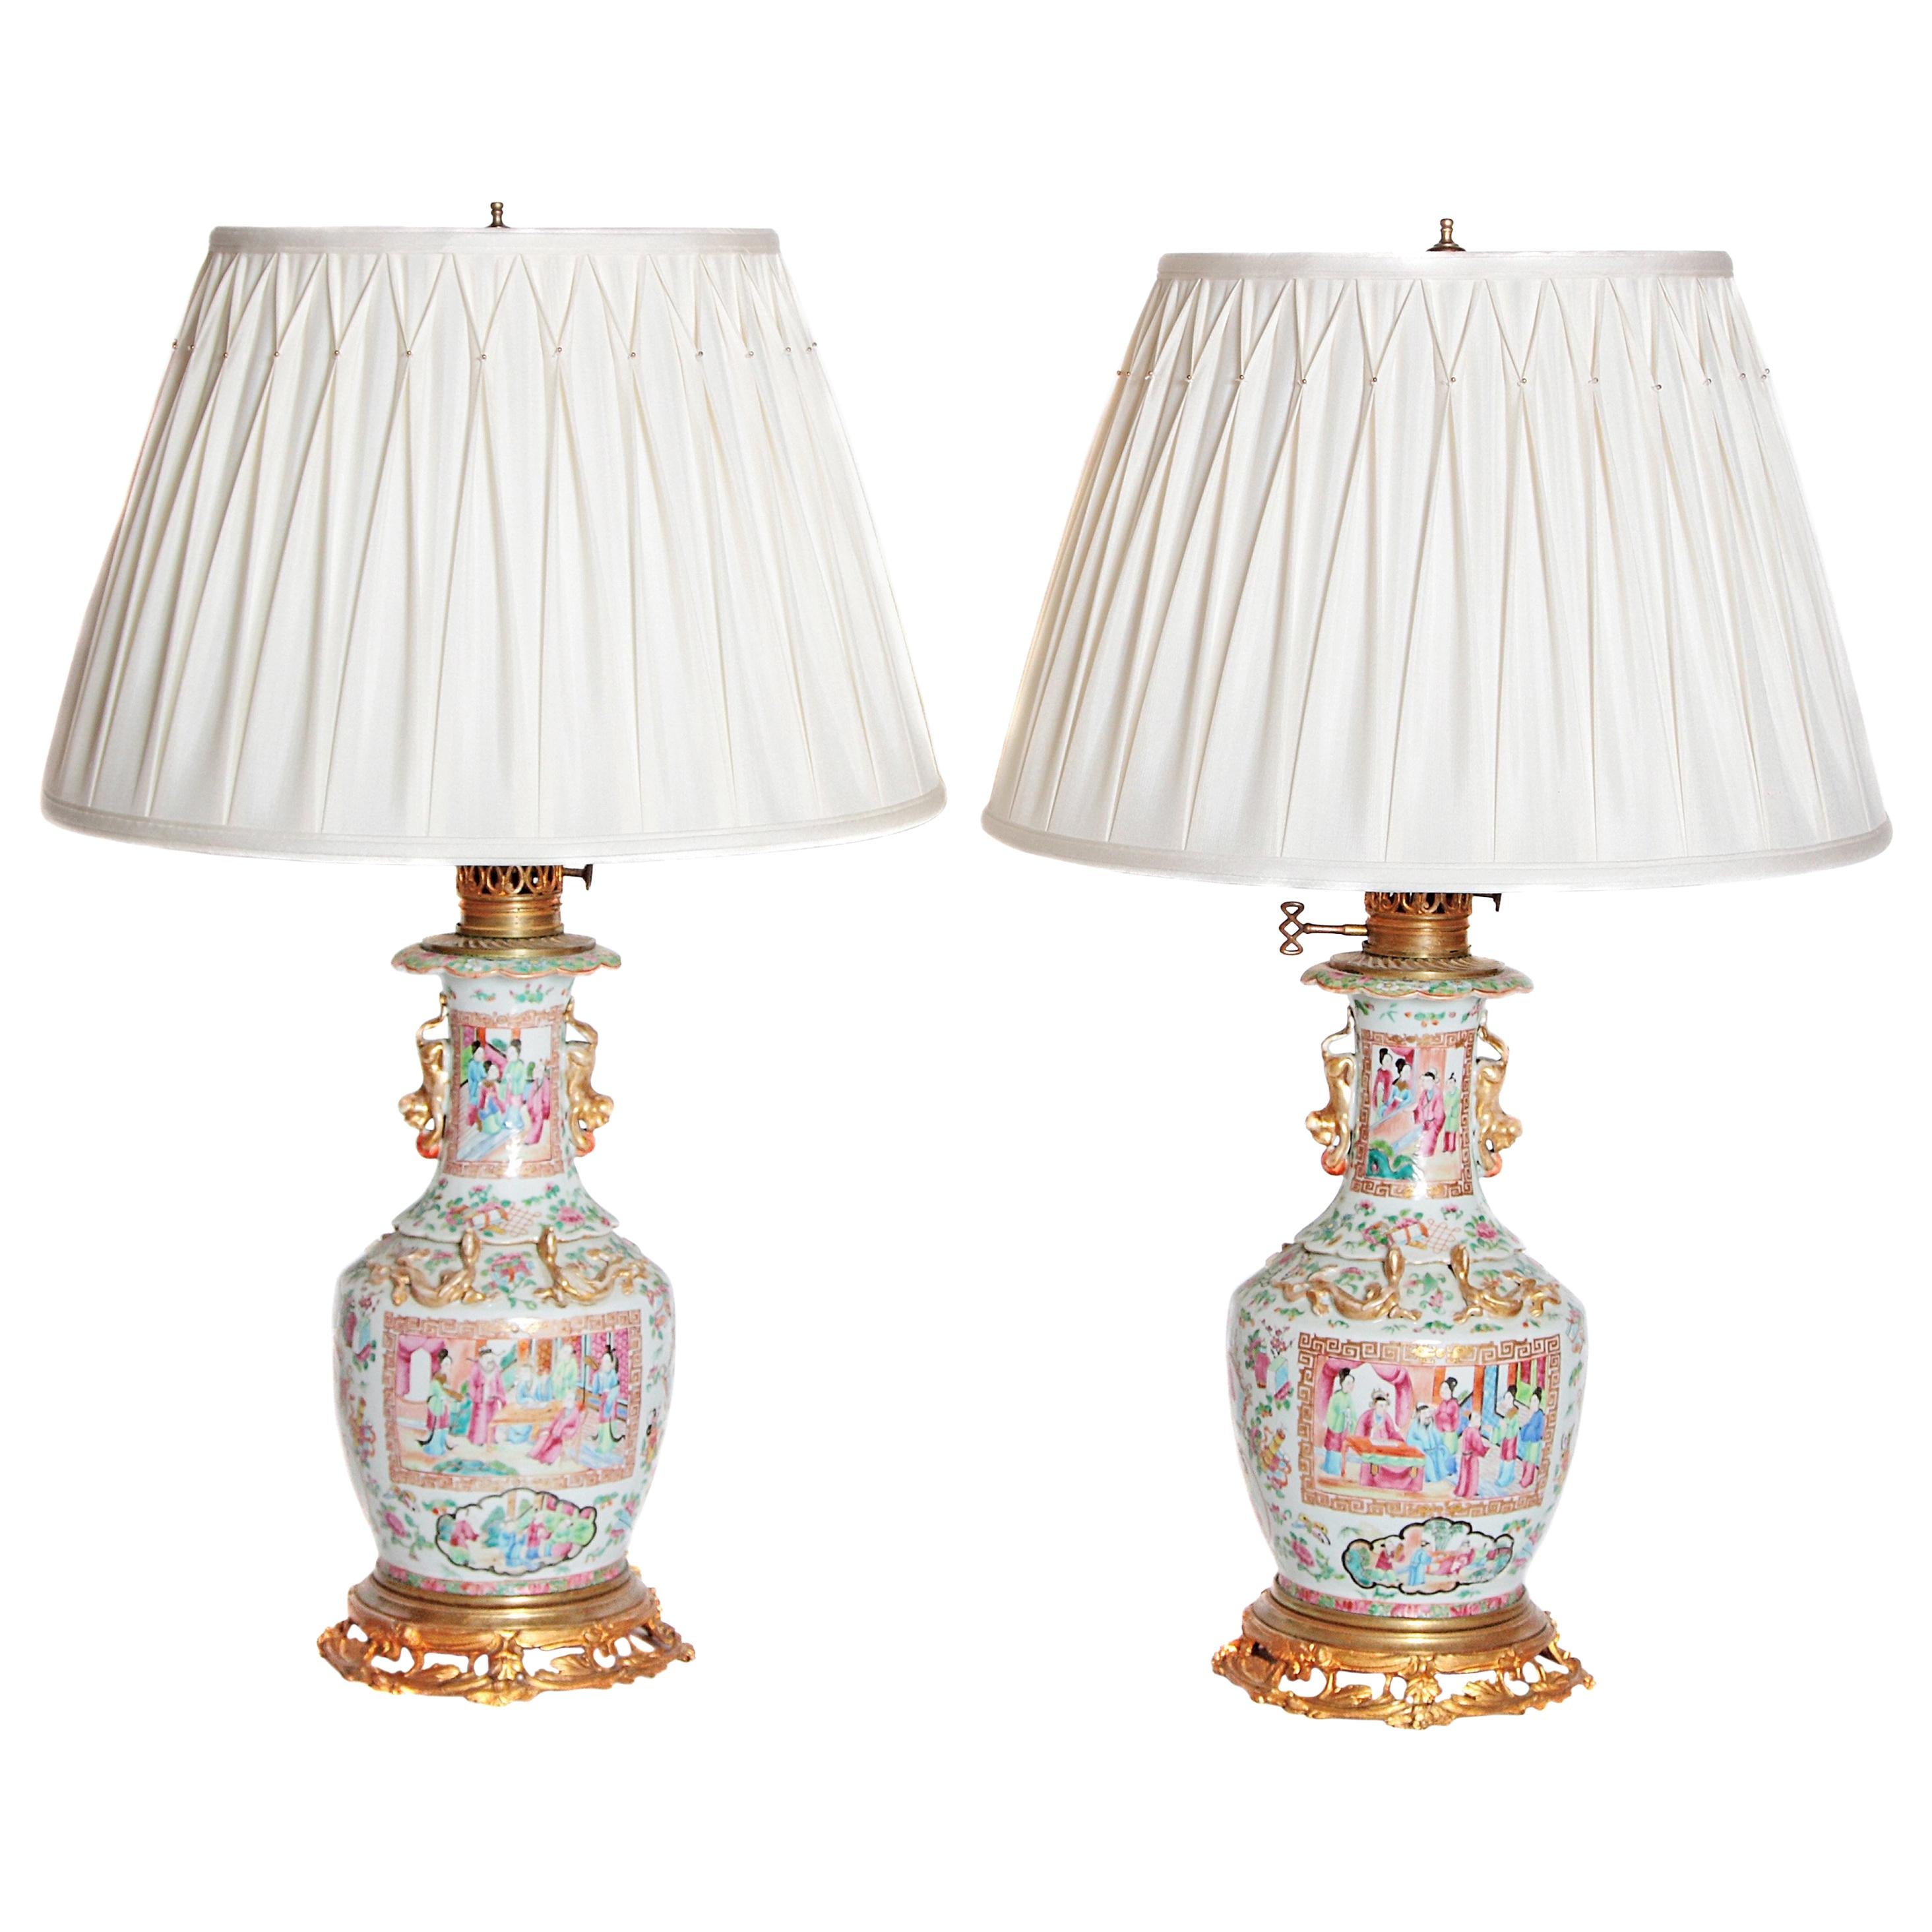 Pair of 19th Century Chinese Rose Medallion Vases Mounted as Lamps